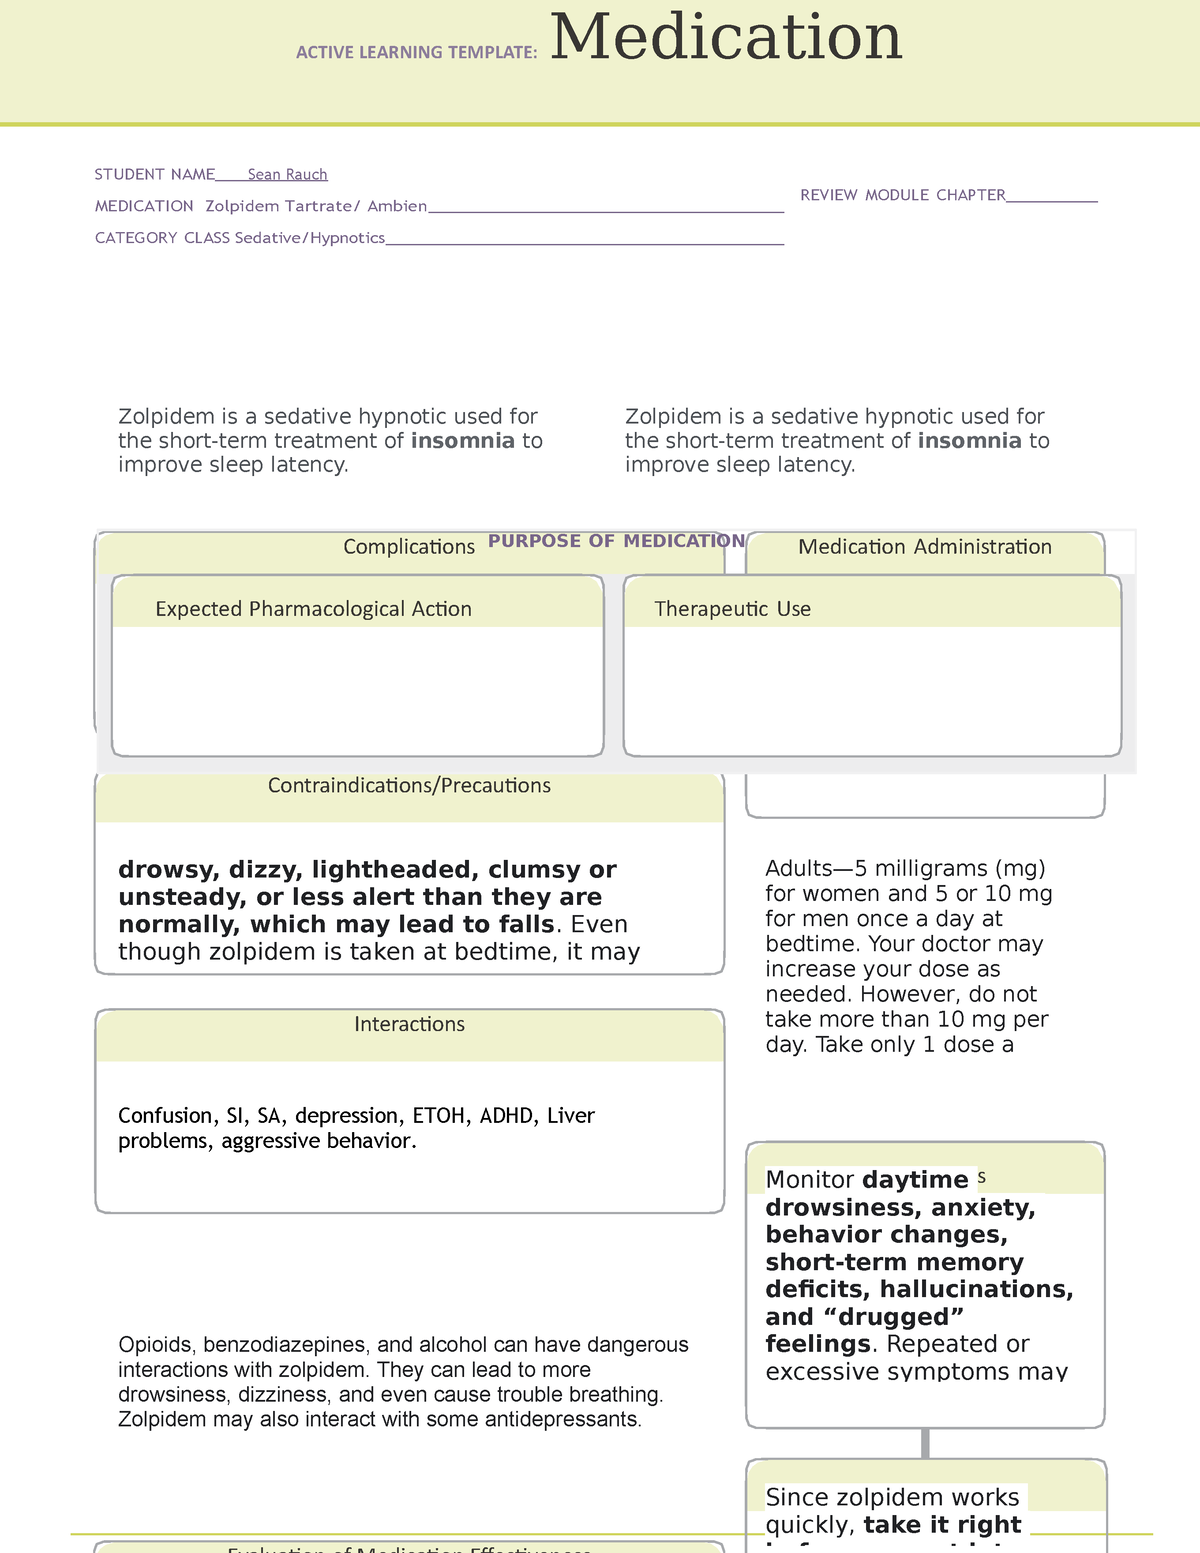 Zolpidem Tartrate Medication Template ACTIVE LEARNING TEMPLATE